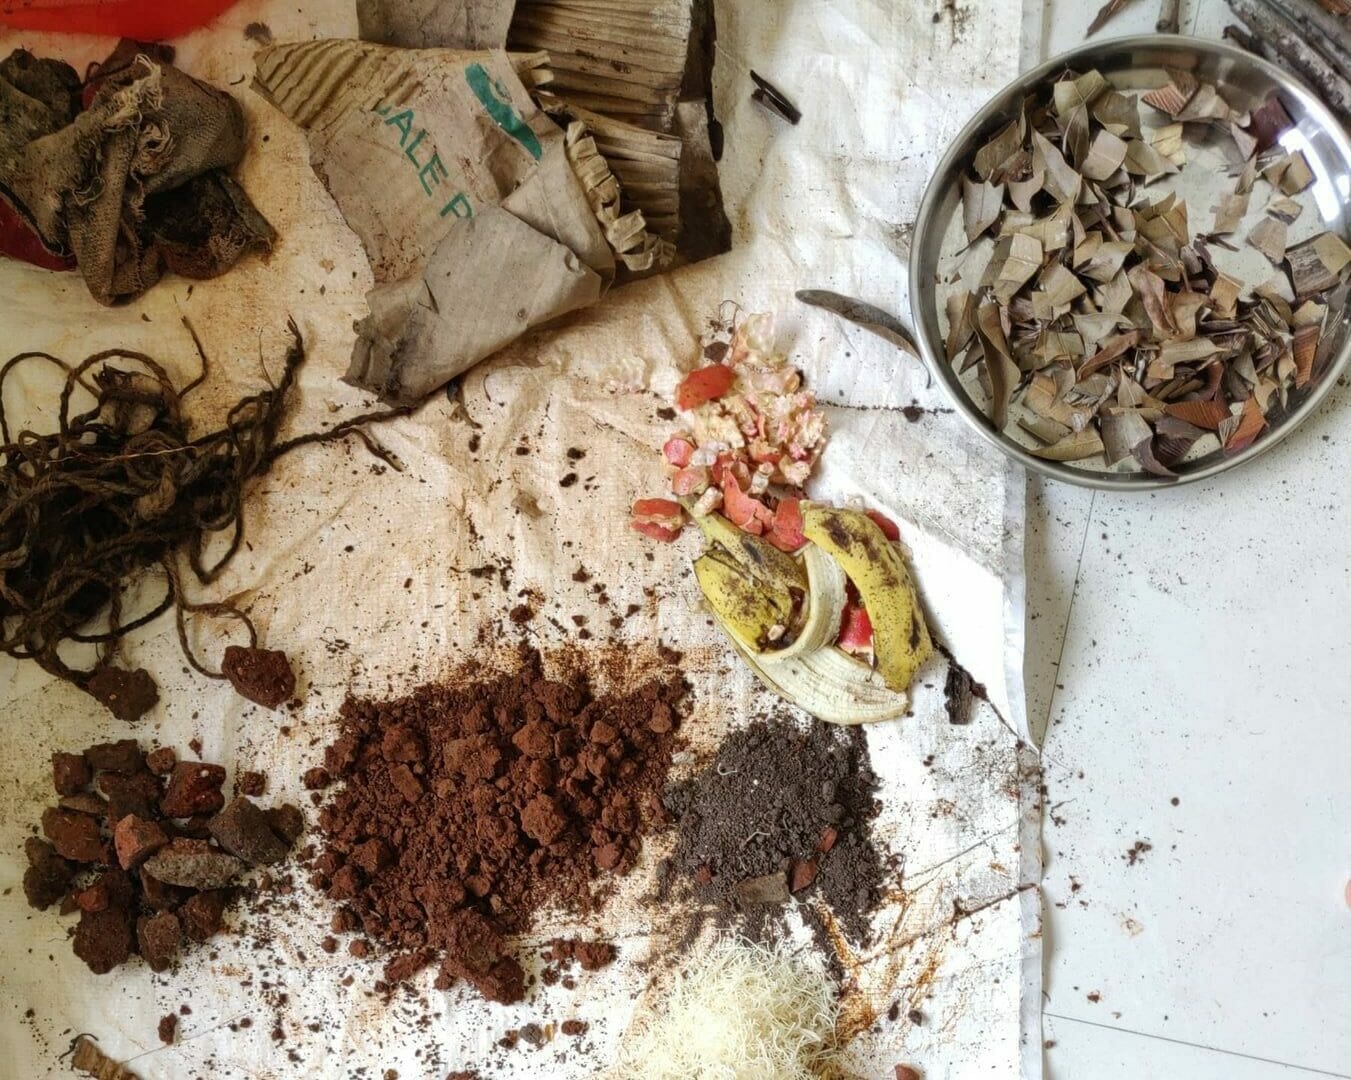 Soil, mud rocks, dries leaves and food waste ready to be mixed for a permaculture garden